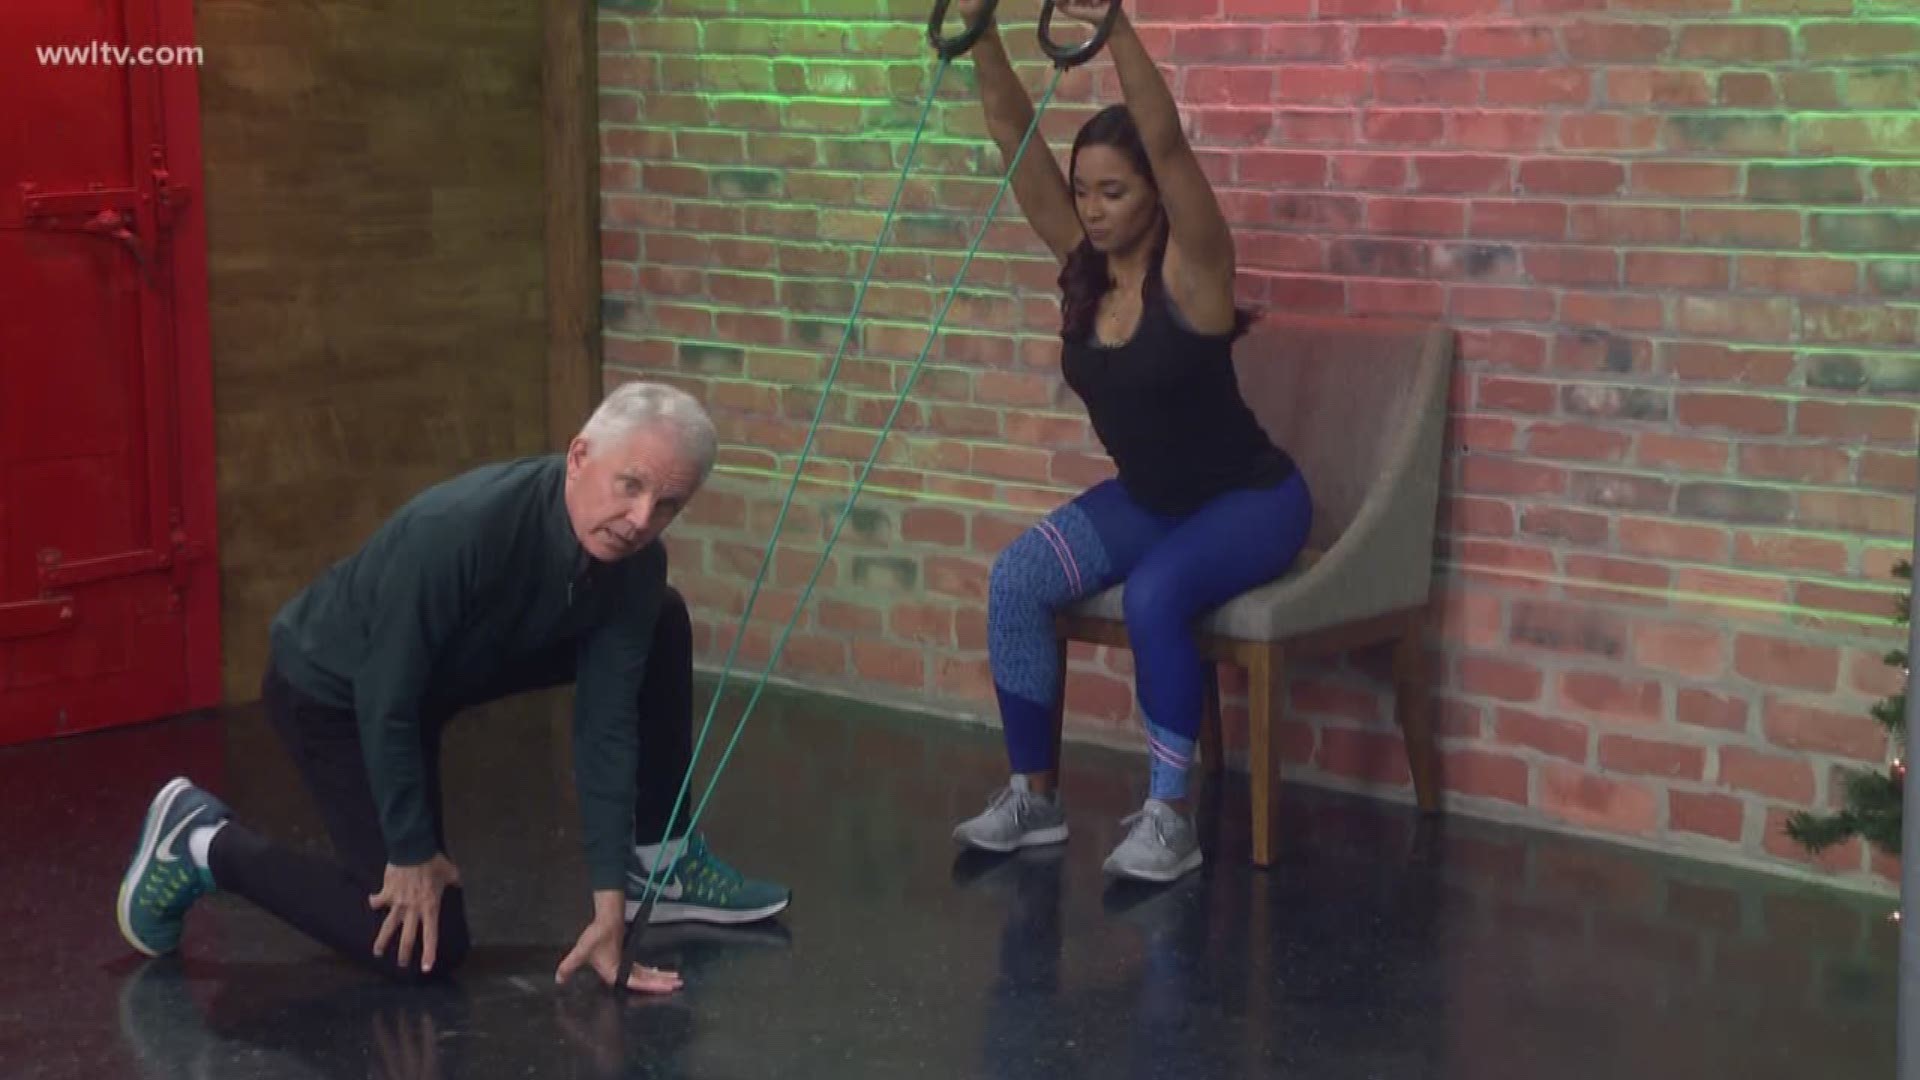 Mackie and April have some great exercises to kick start your resolution.